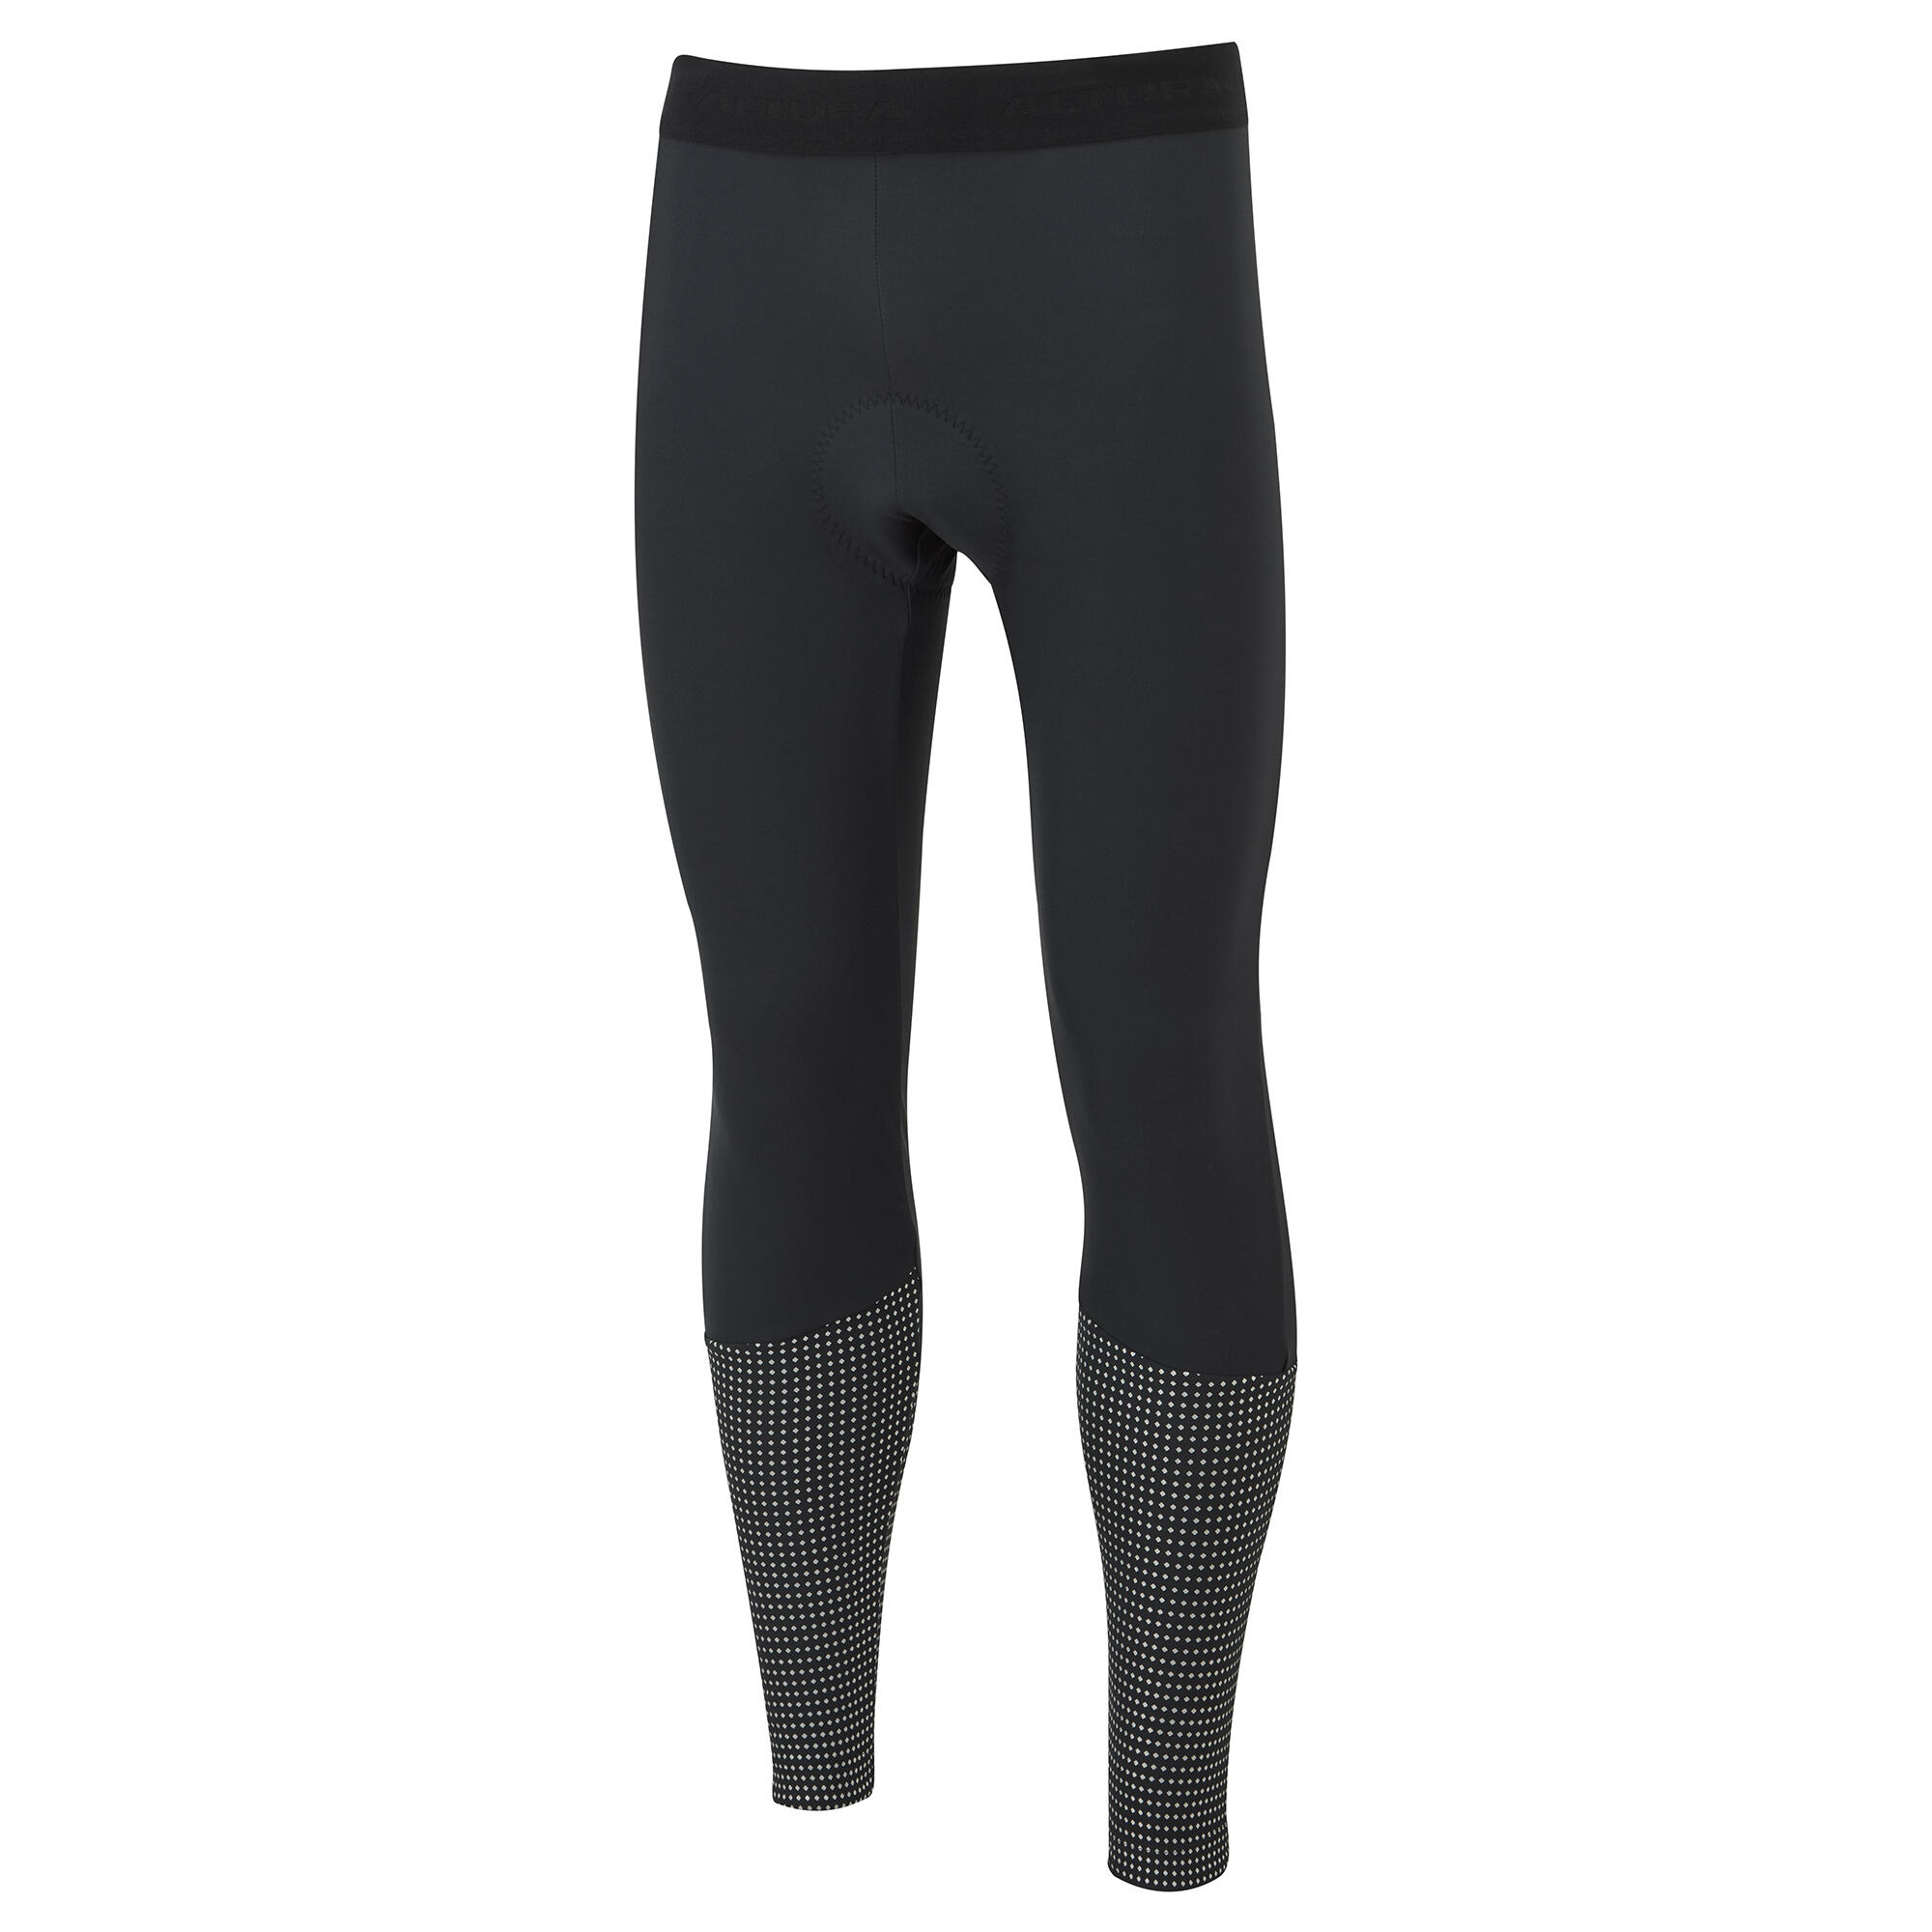 Nightvision DWR Men's Cycling Waist Tights 4/5